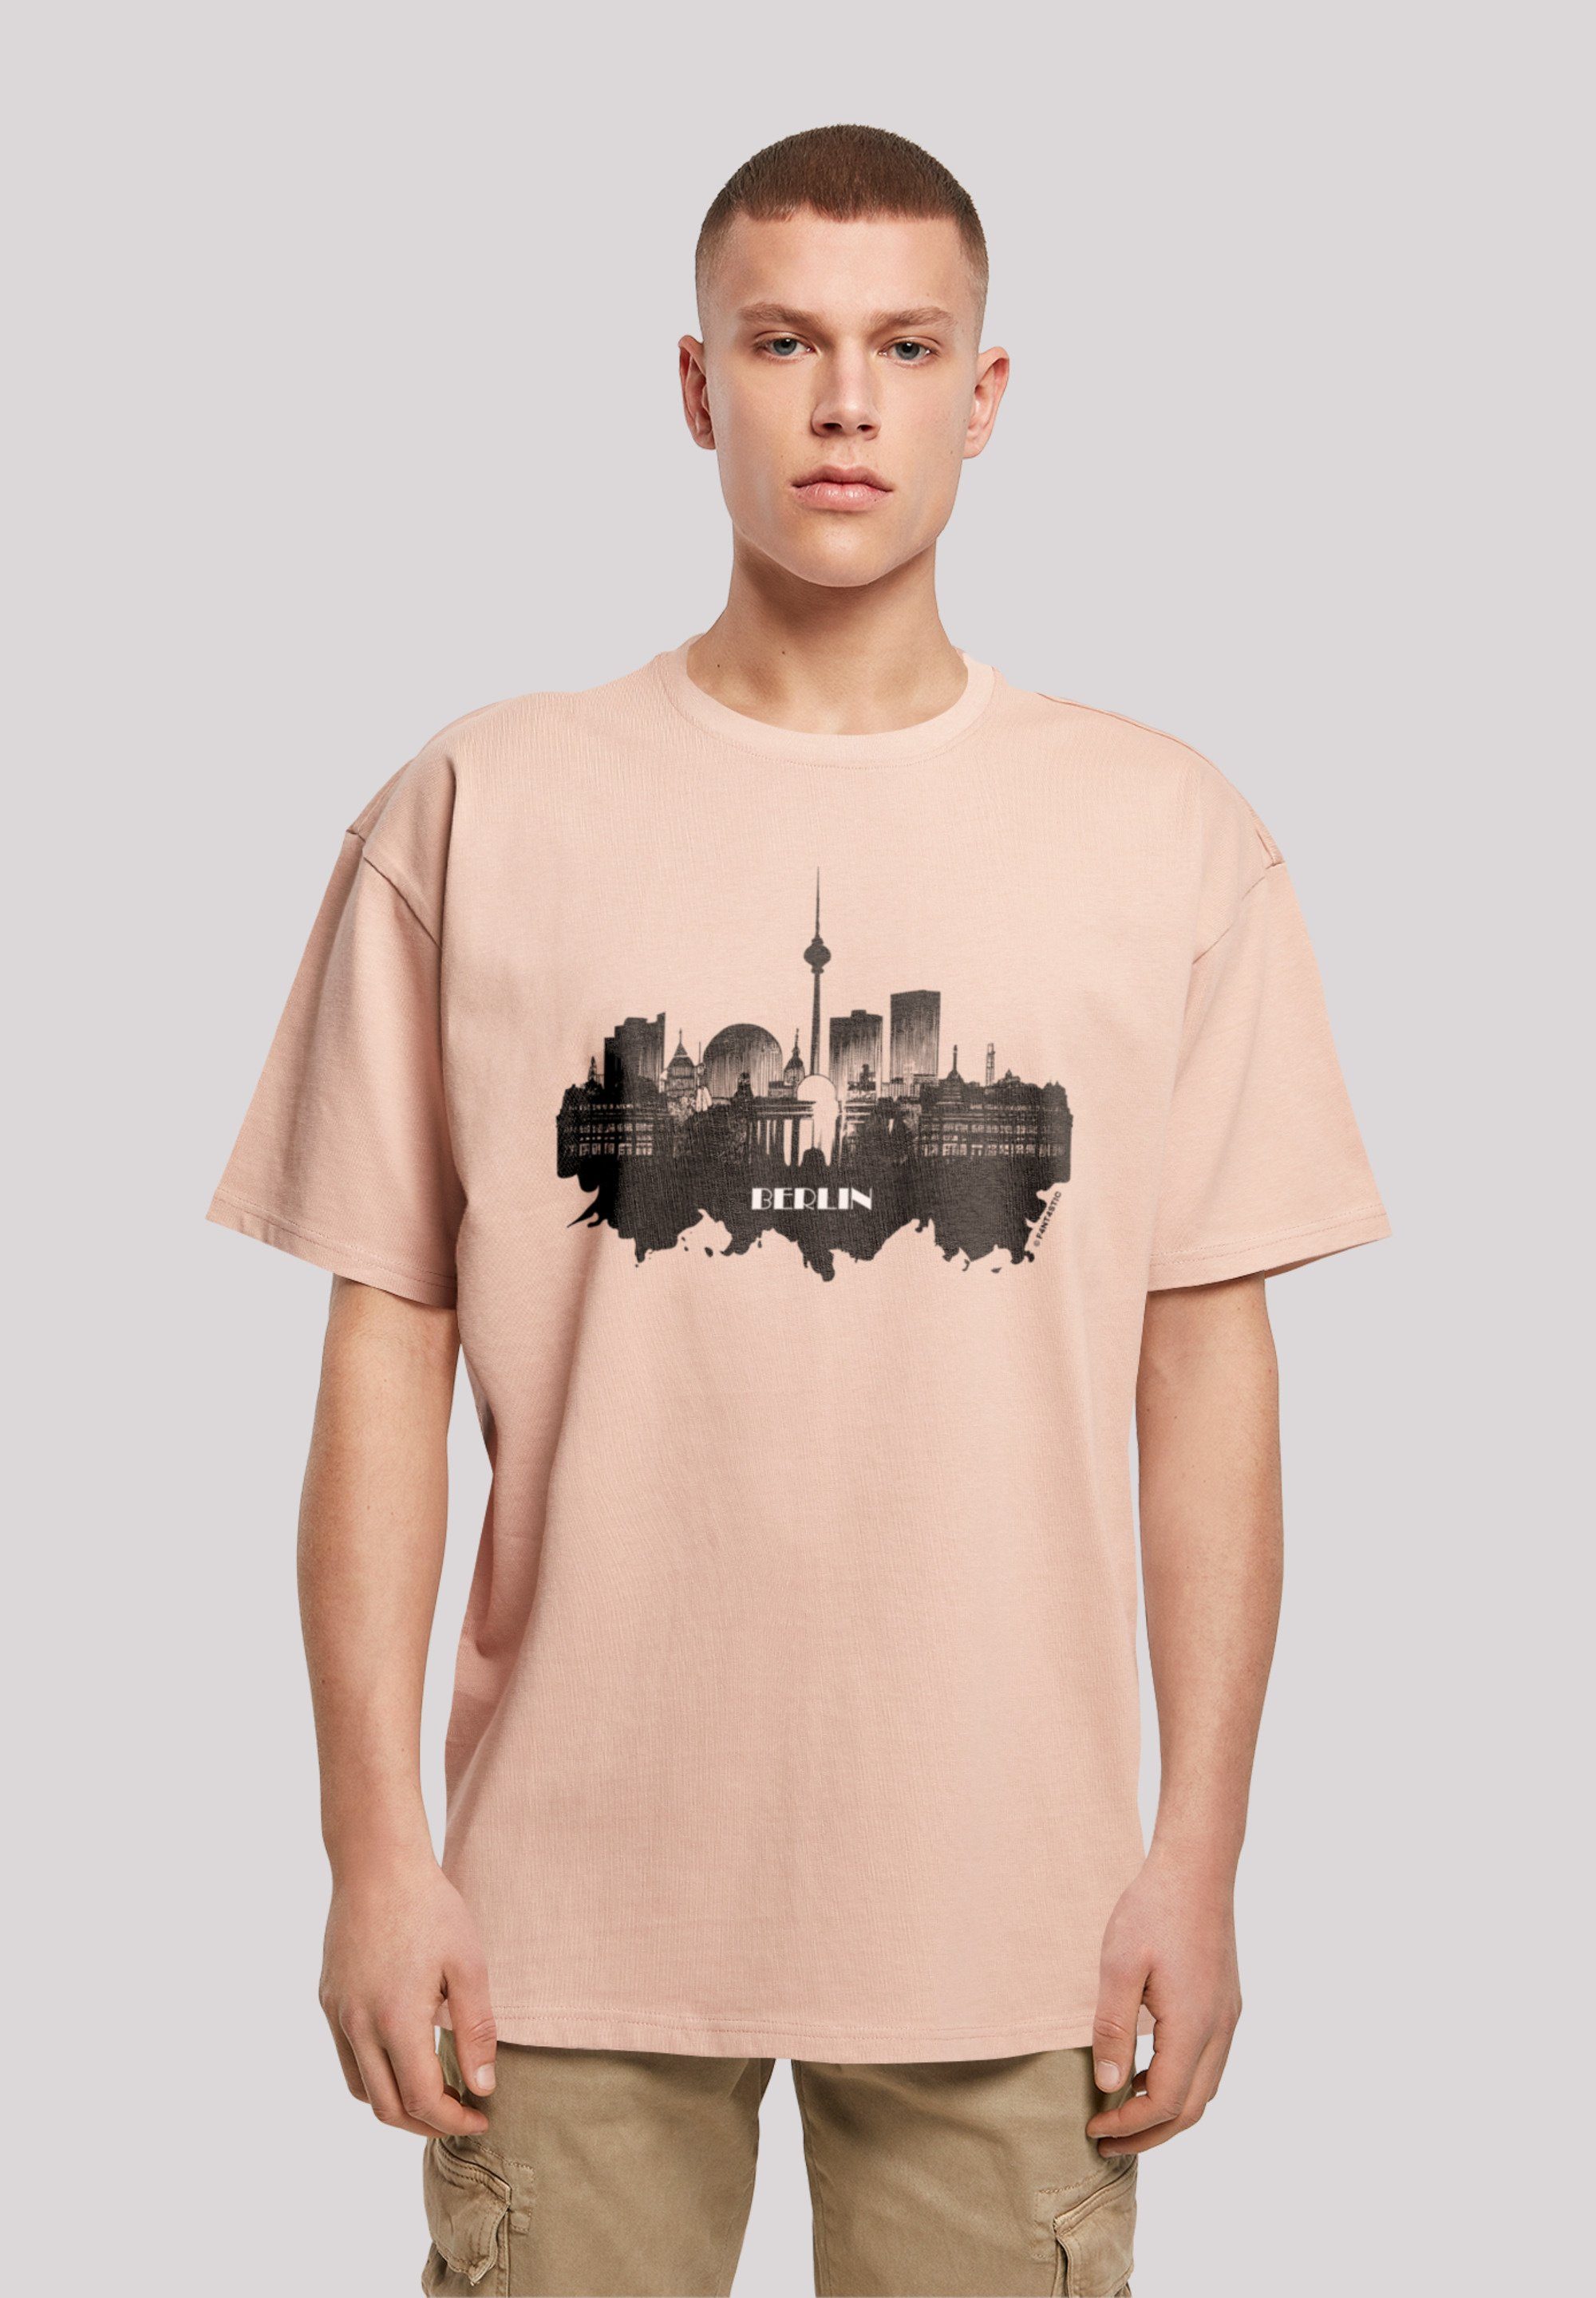 F4NT4STIC T-Shirt Cities Collection - Berlin skyline Print amber